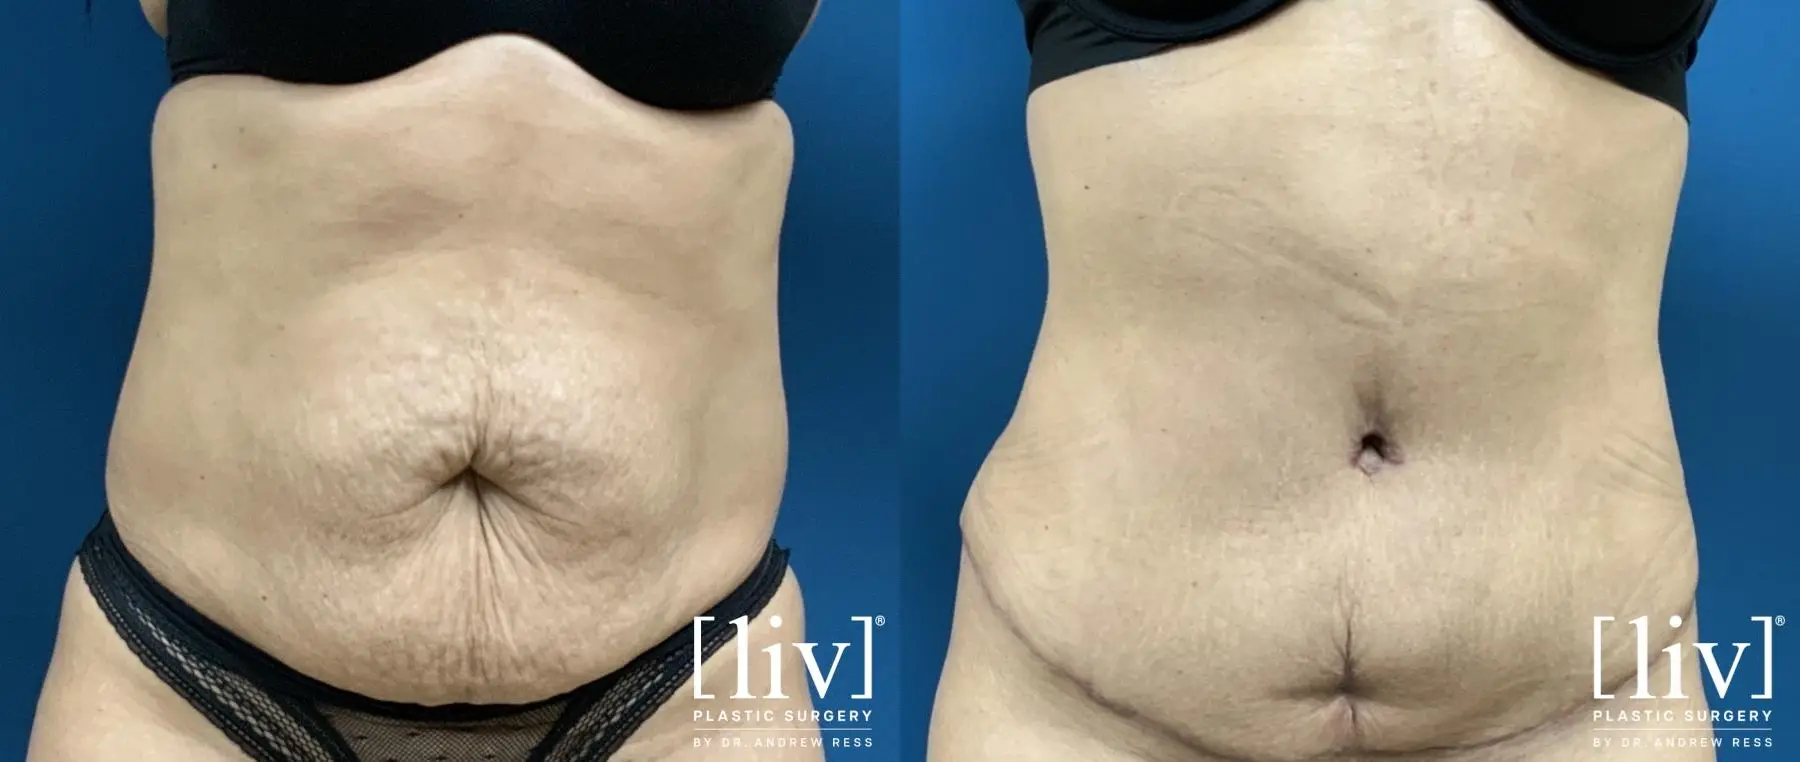 Lipoabdominoplasty - Before and After 3